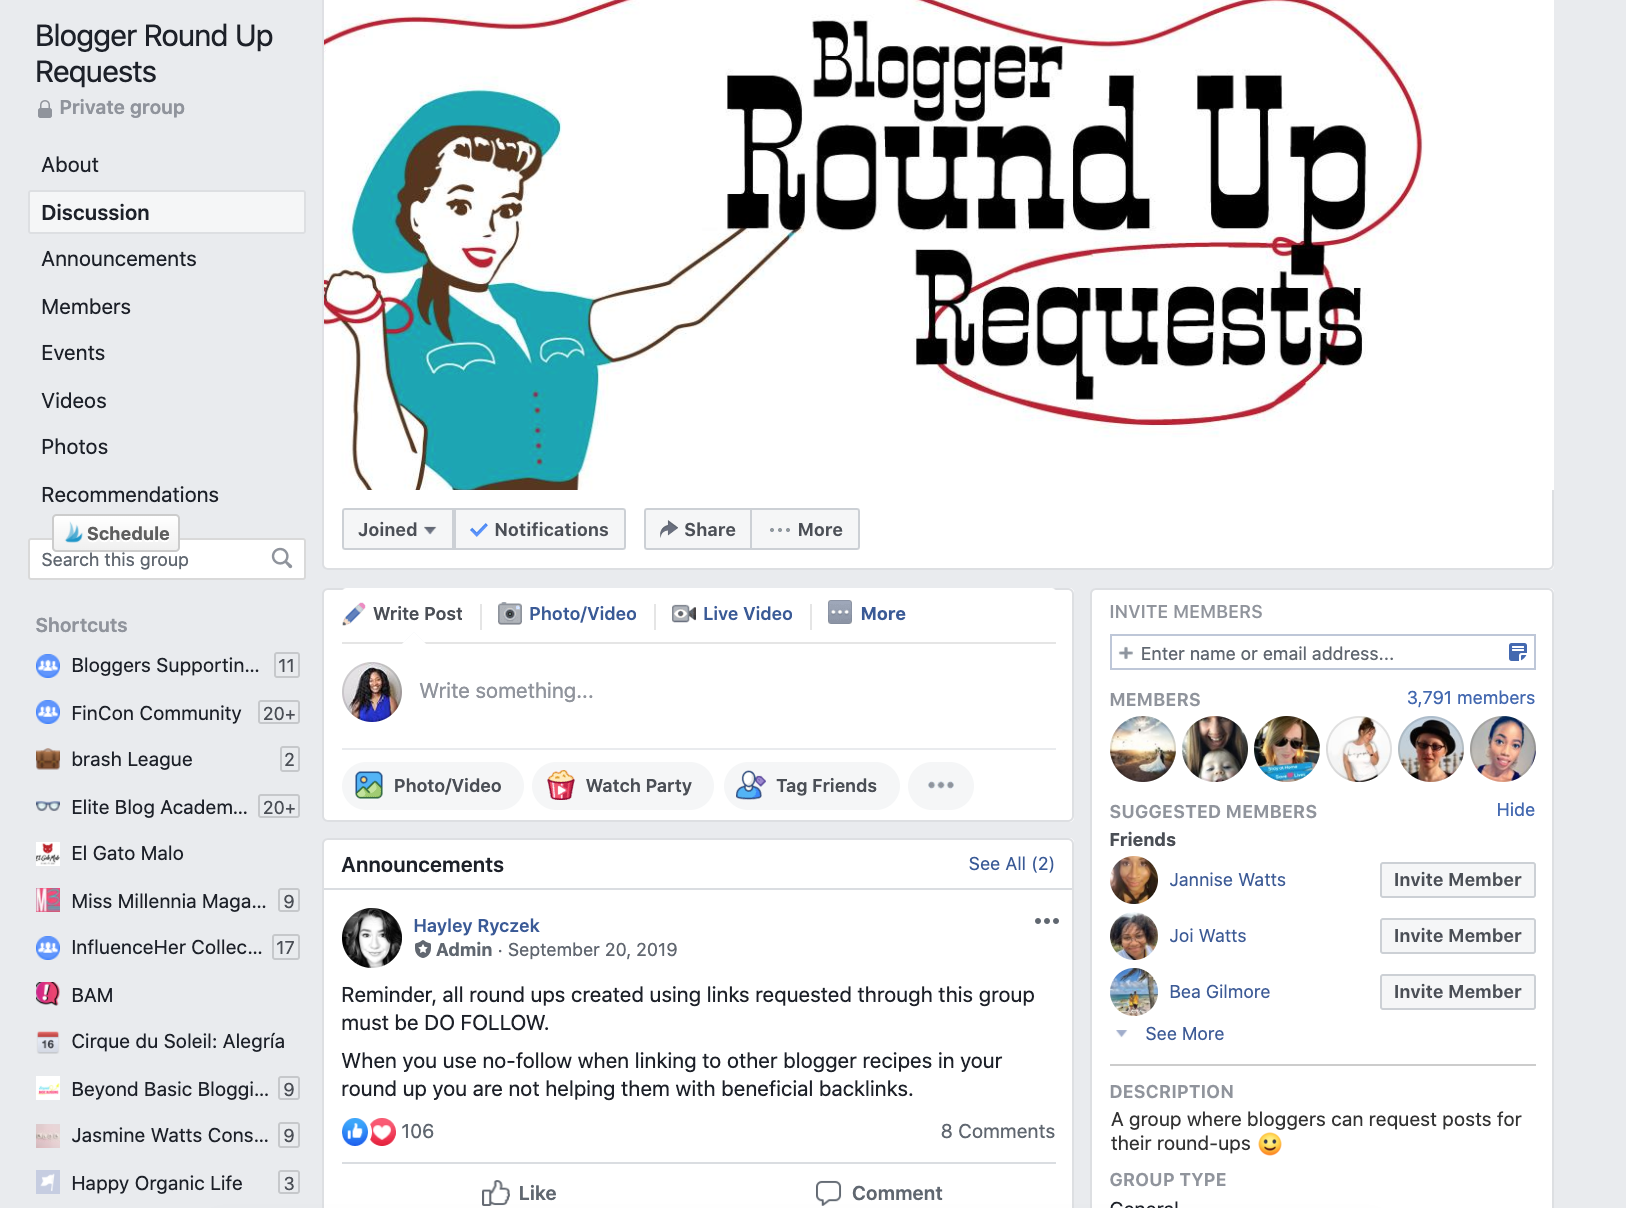 Blogger Round Up Requests